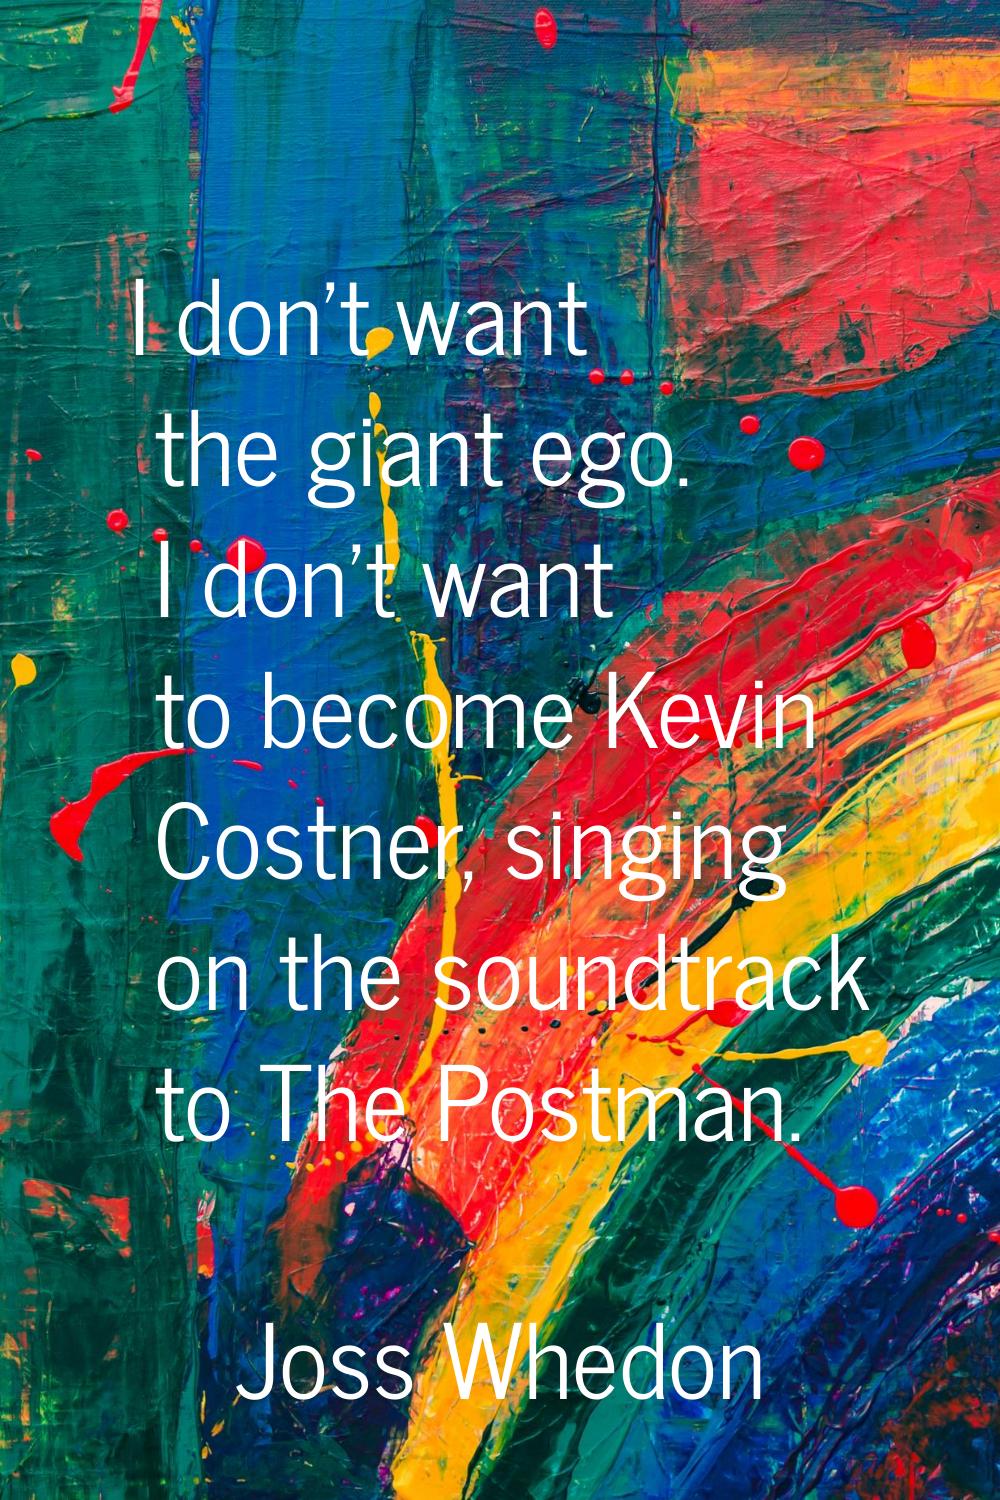 I don't want the giant ego. I don't want to become Kevin Costner, singing on the soundtrack to The 